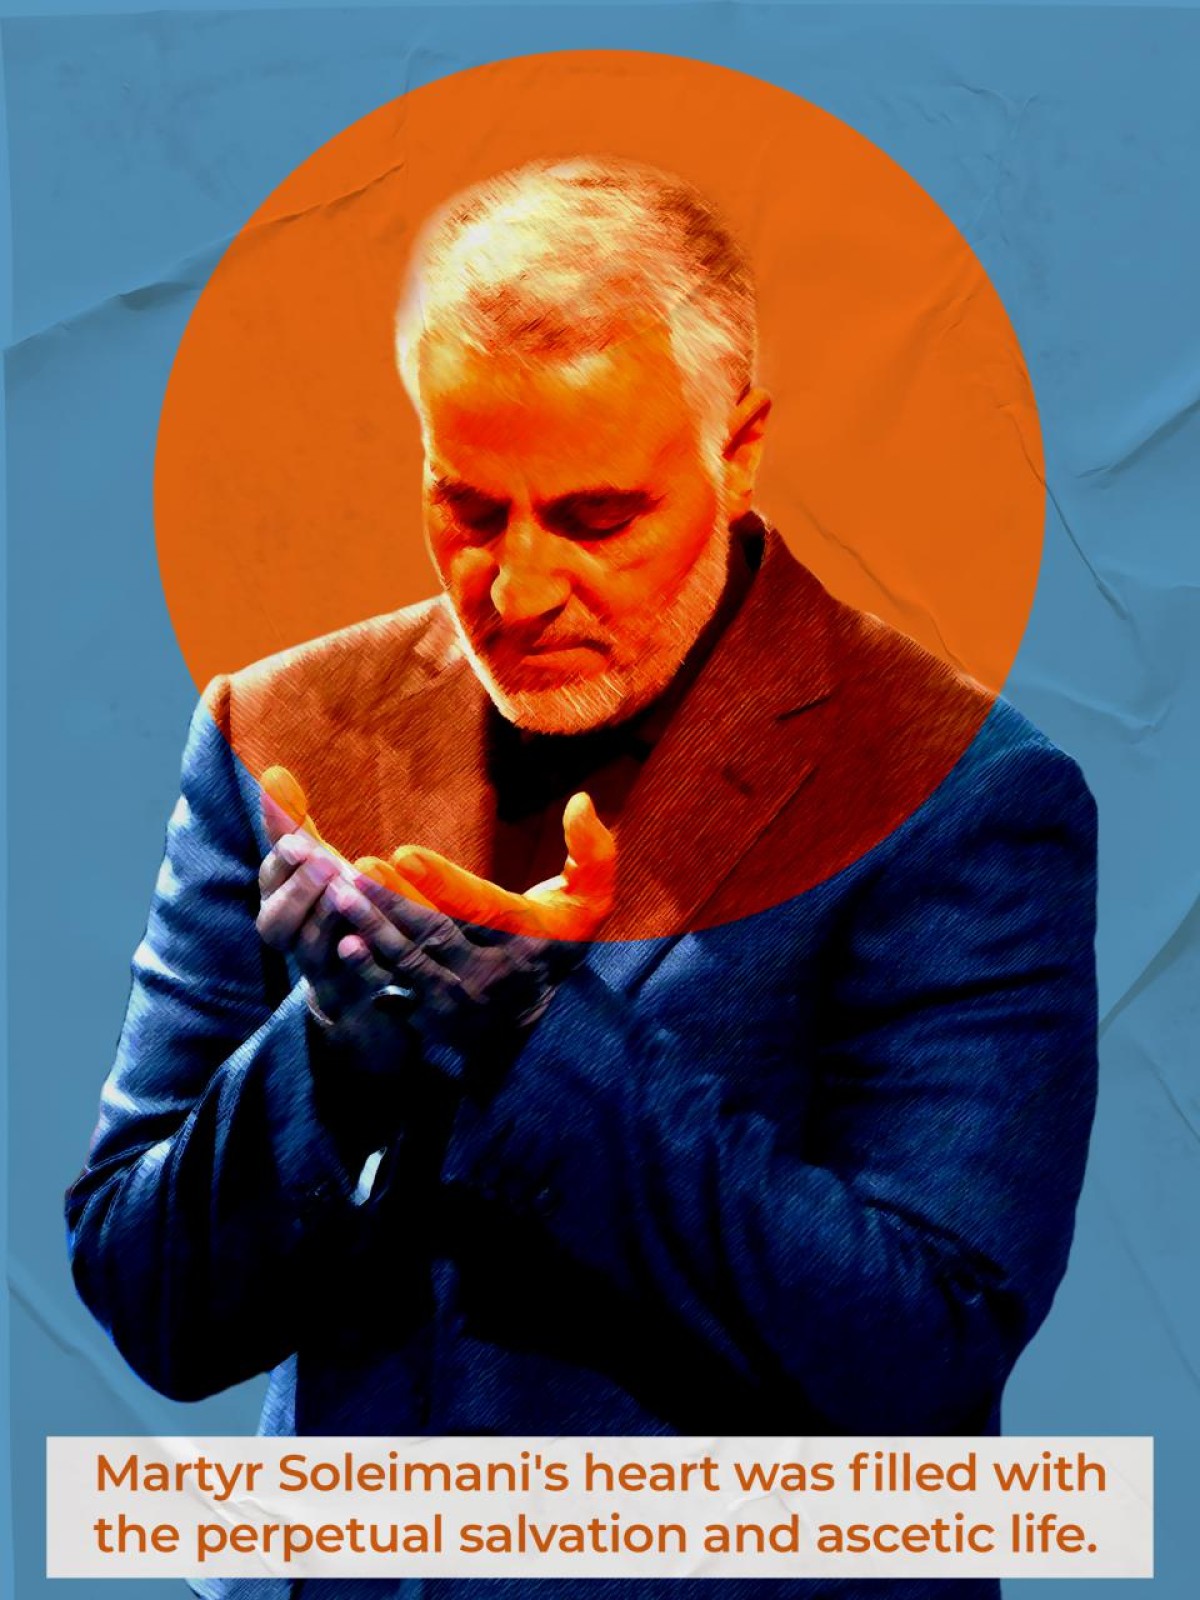 Martyr Soleimani's heart was filled with the perpetual salvation and ascetic life